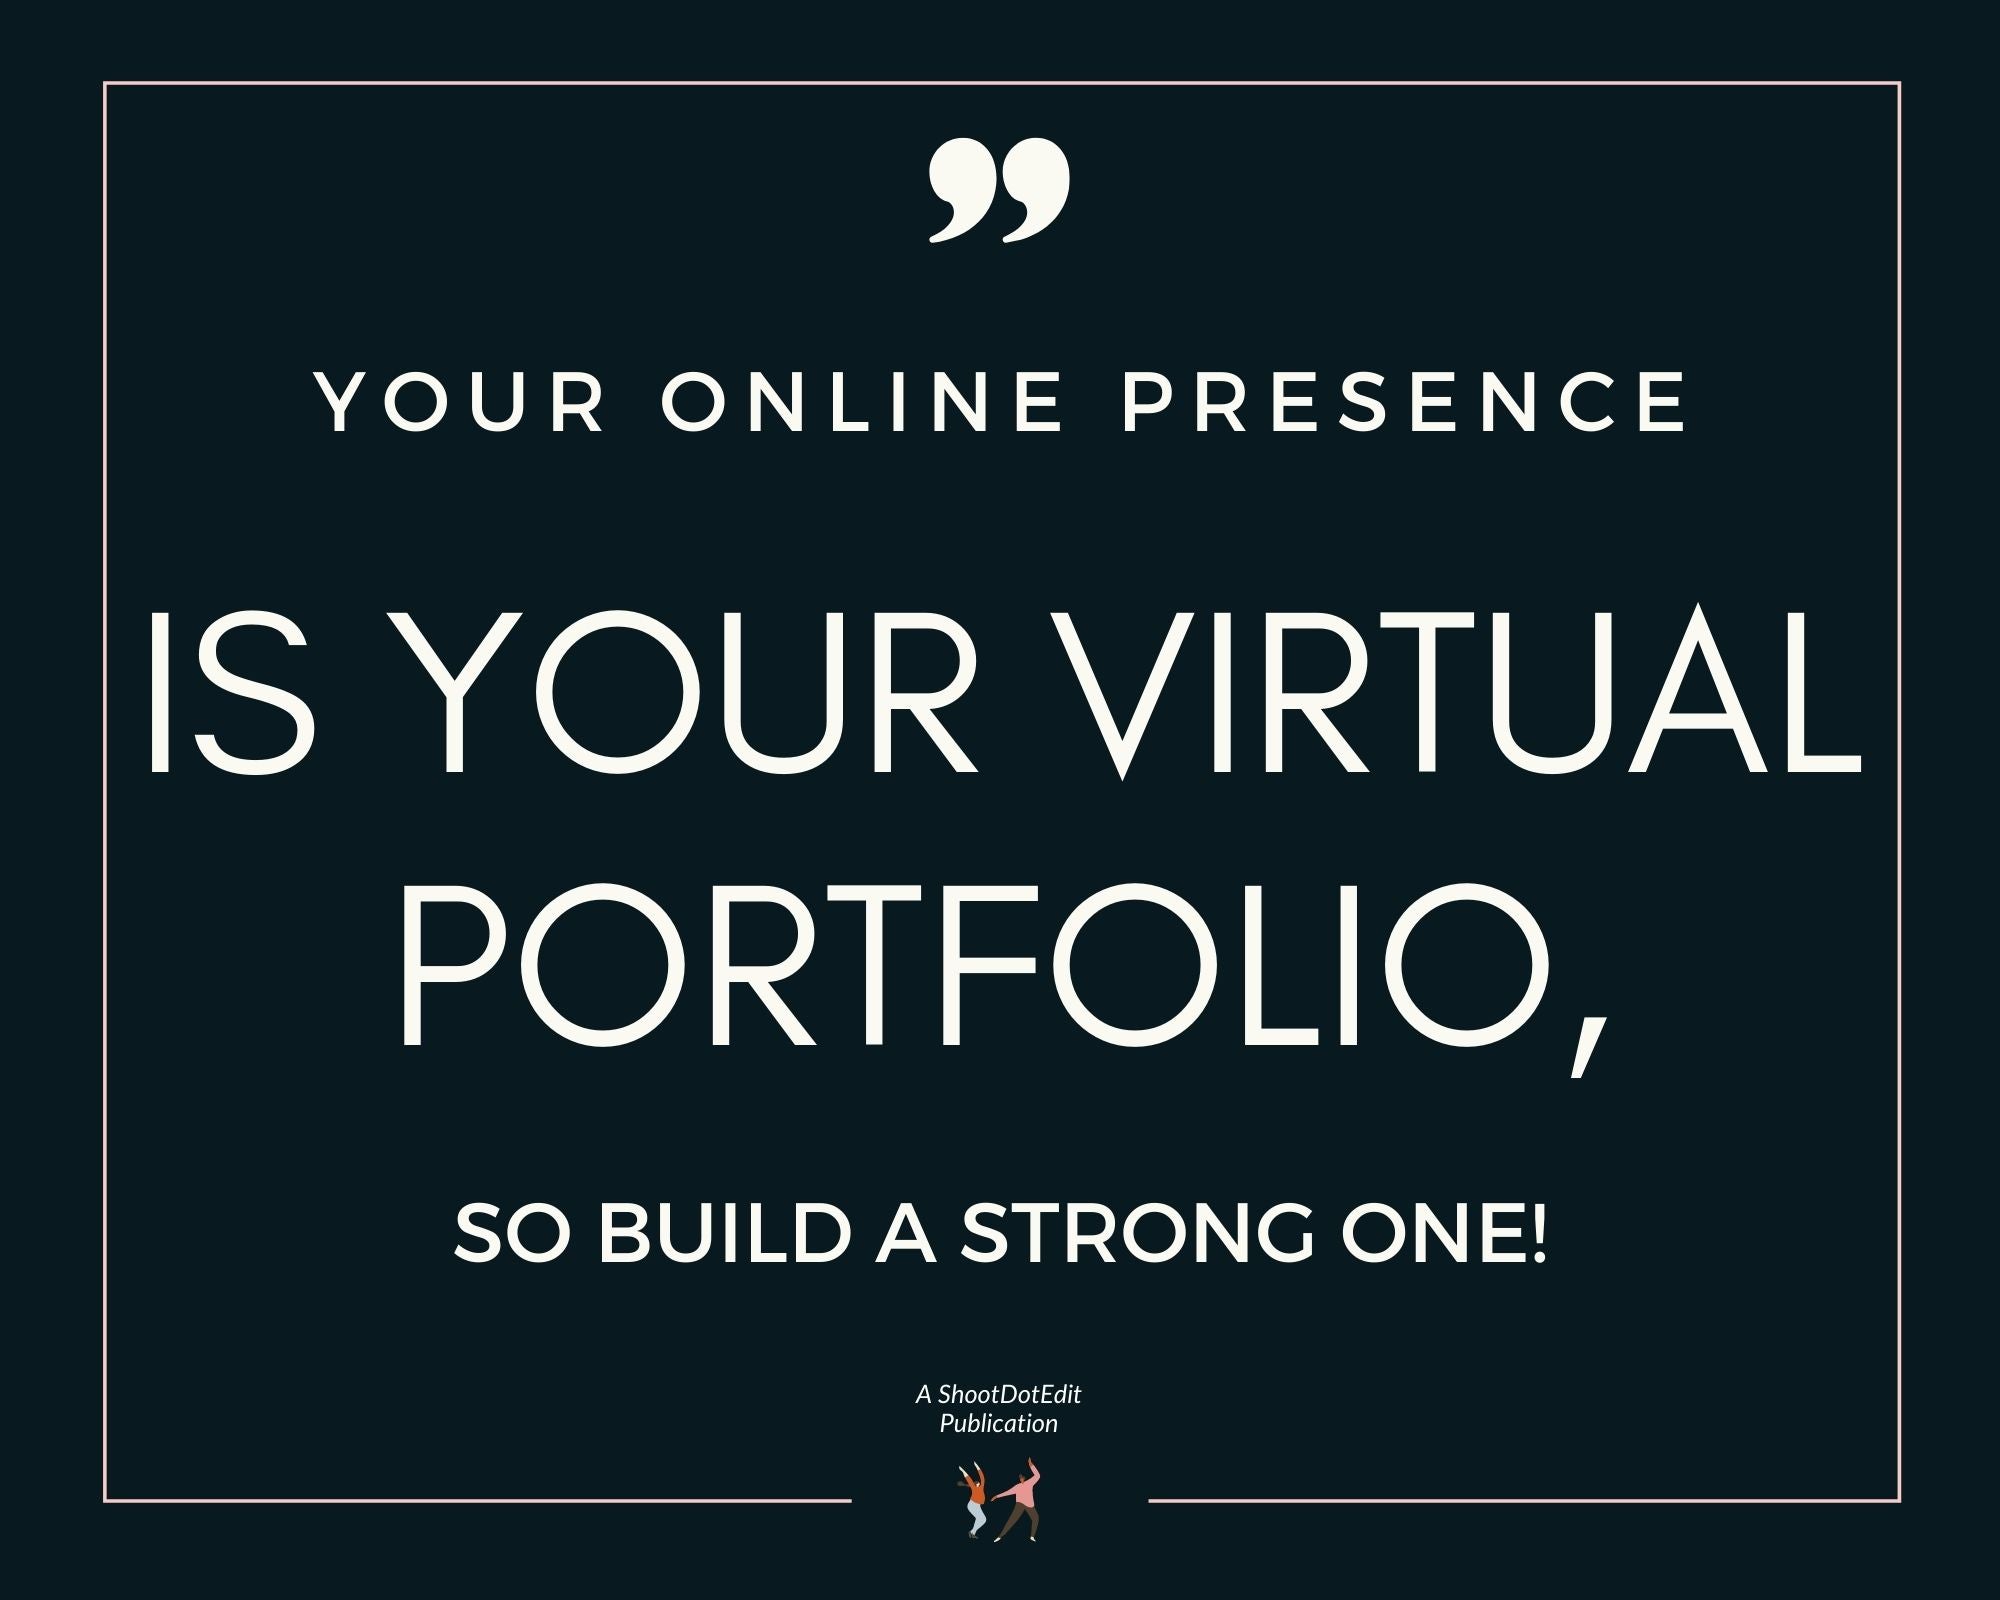 Infographic stating your online presence is your virtual portfolio so build a strong one